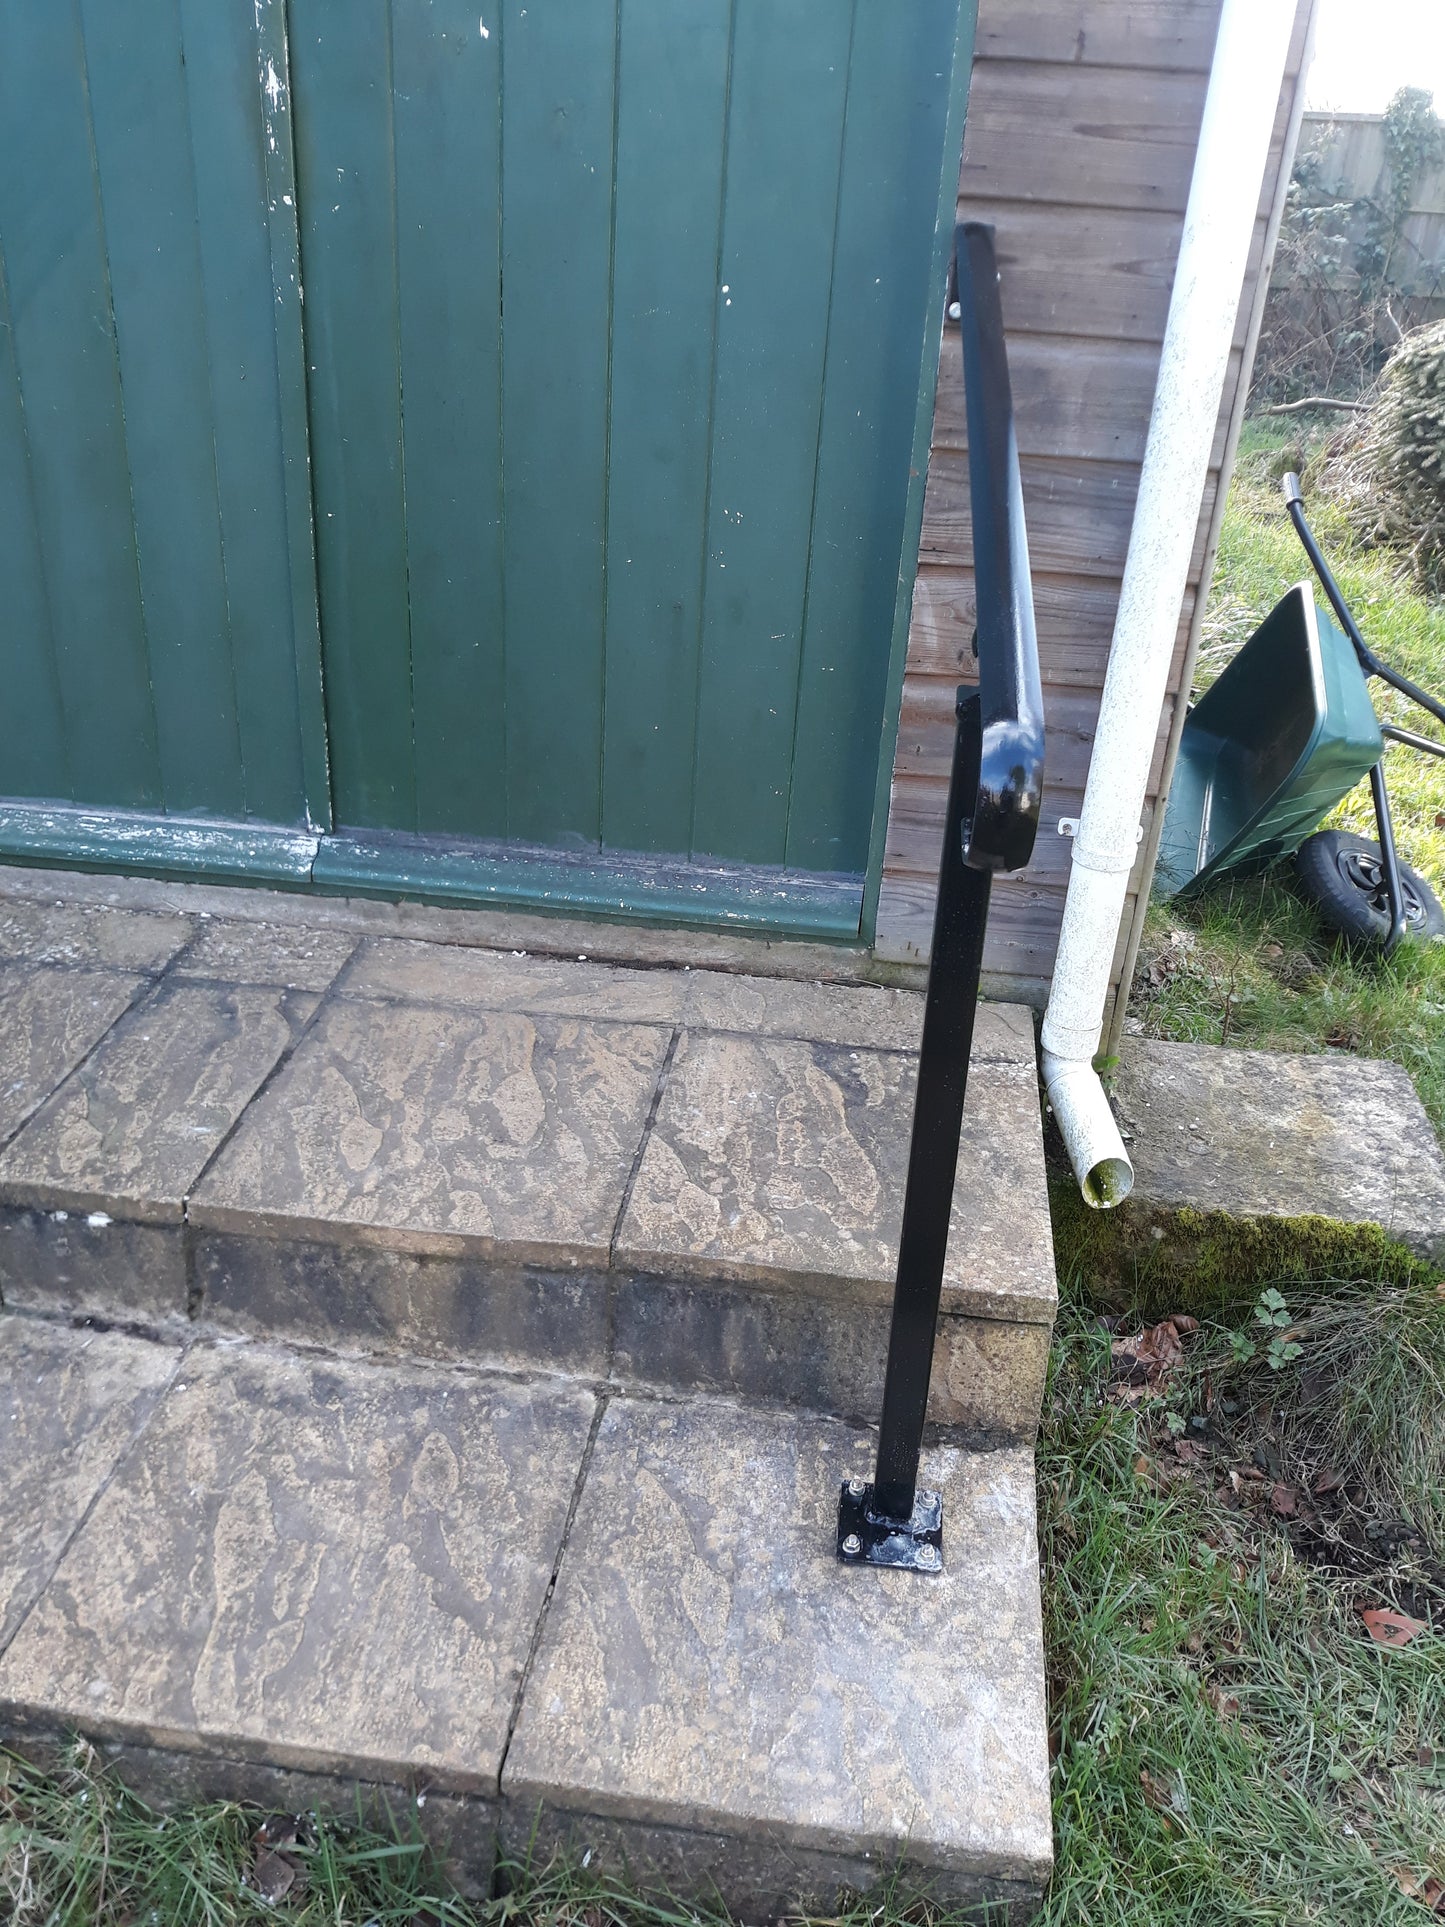 Wrought Iron Style Exterior Handrail Railing With One Bolt Down Post - Ozias - 0.8m - 2.2m